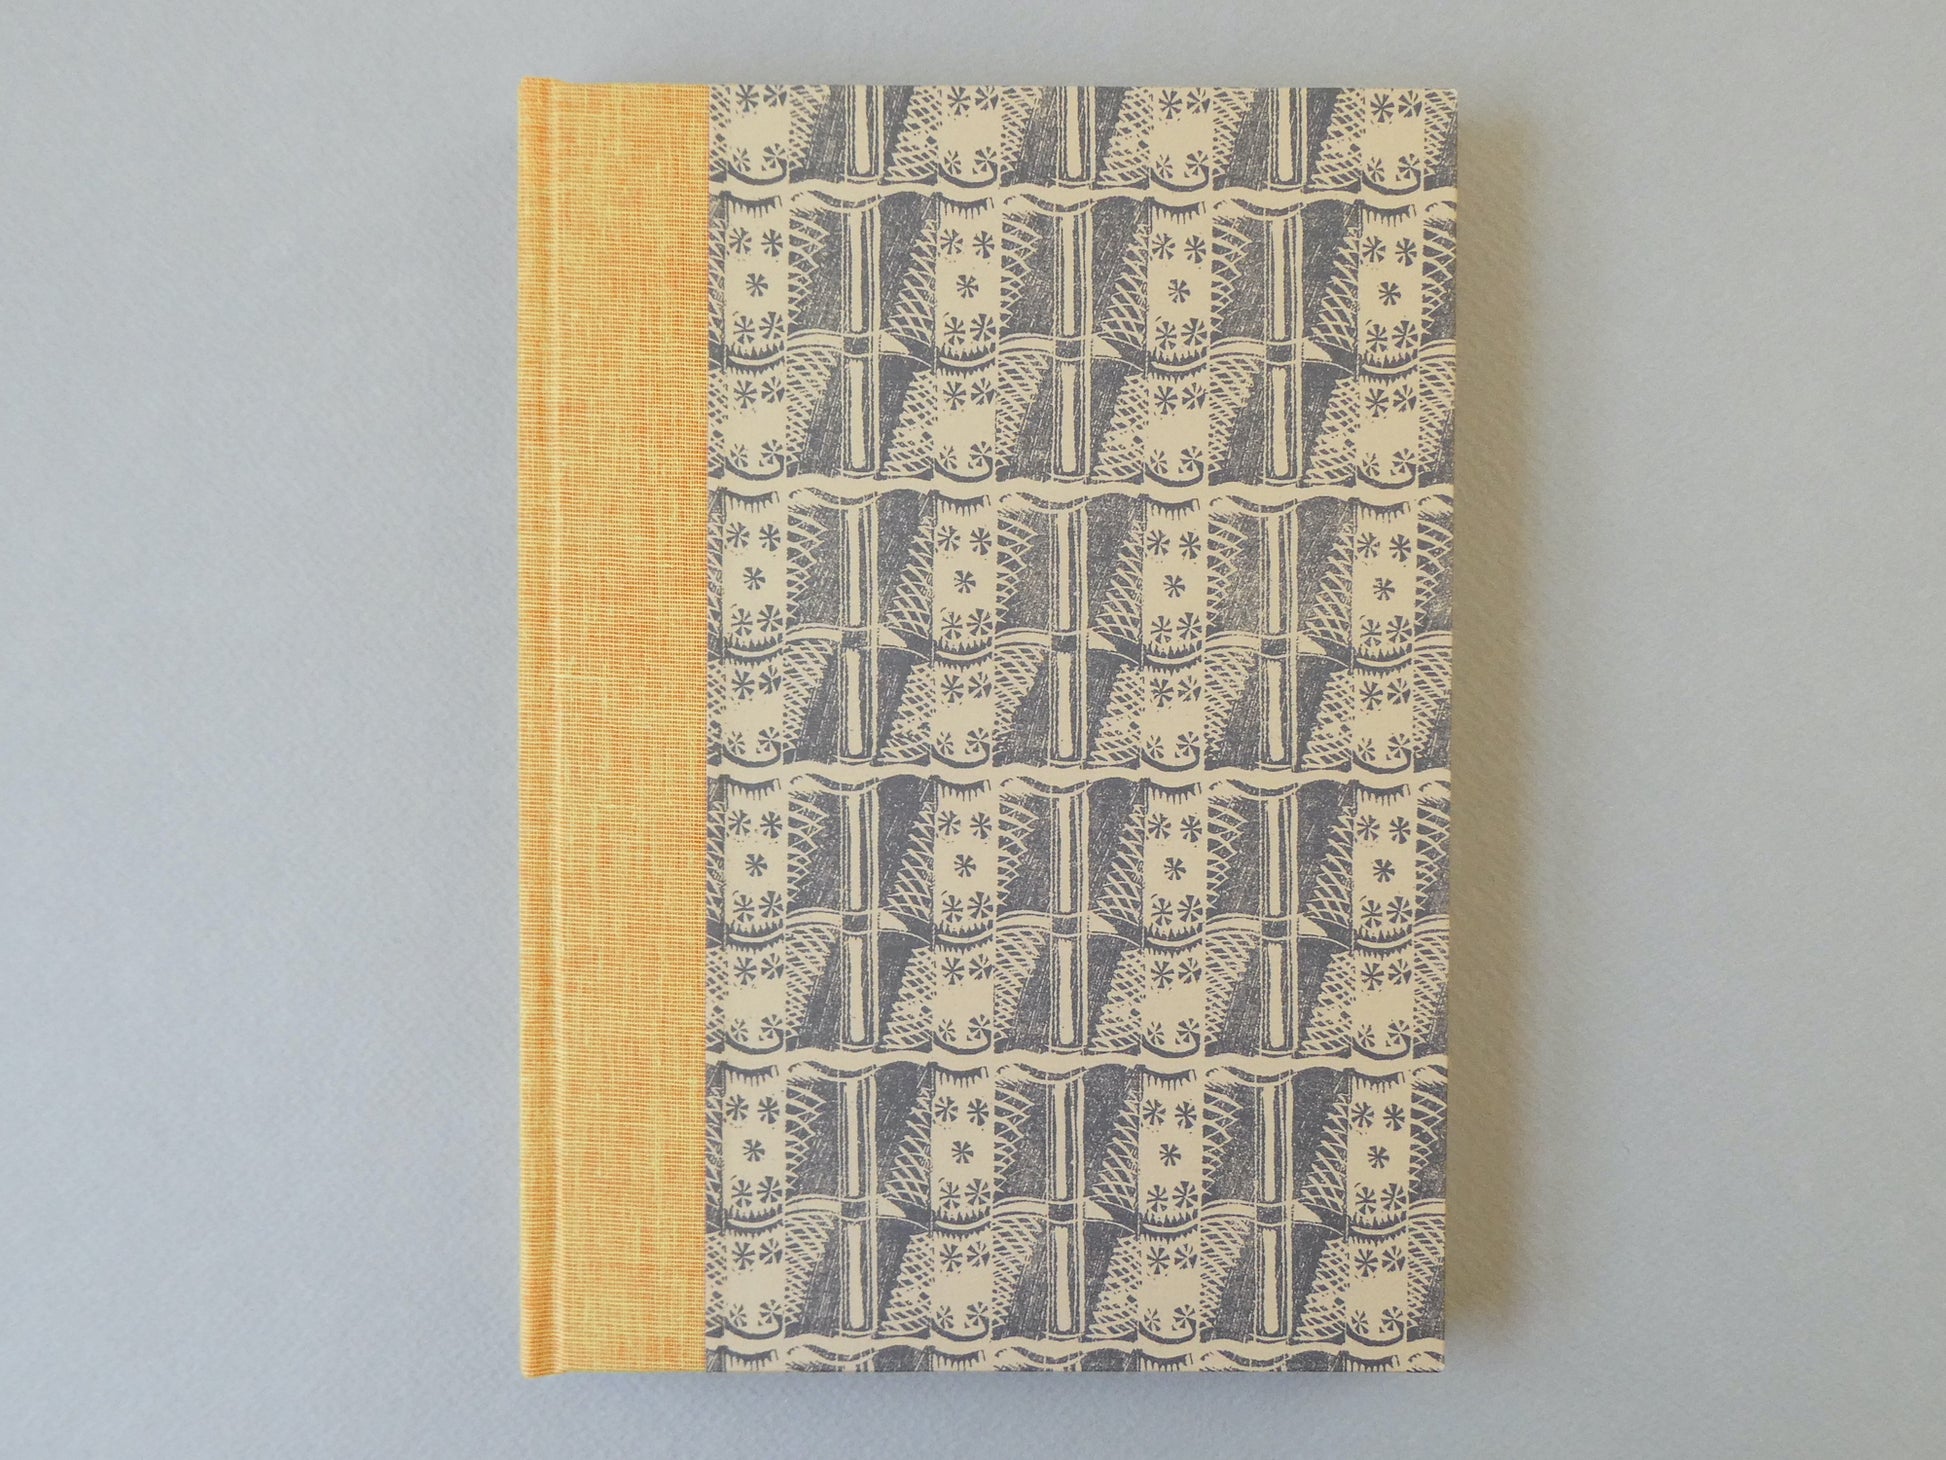 Enid Marx Sketchbook portrait format with Bamboo pattern